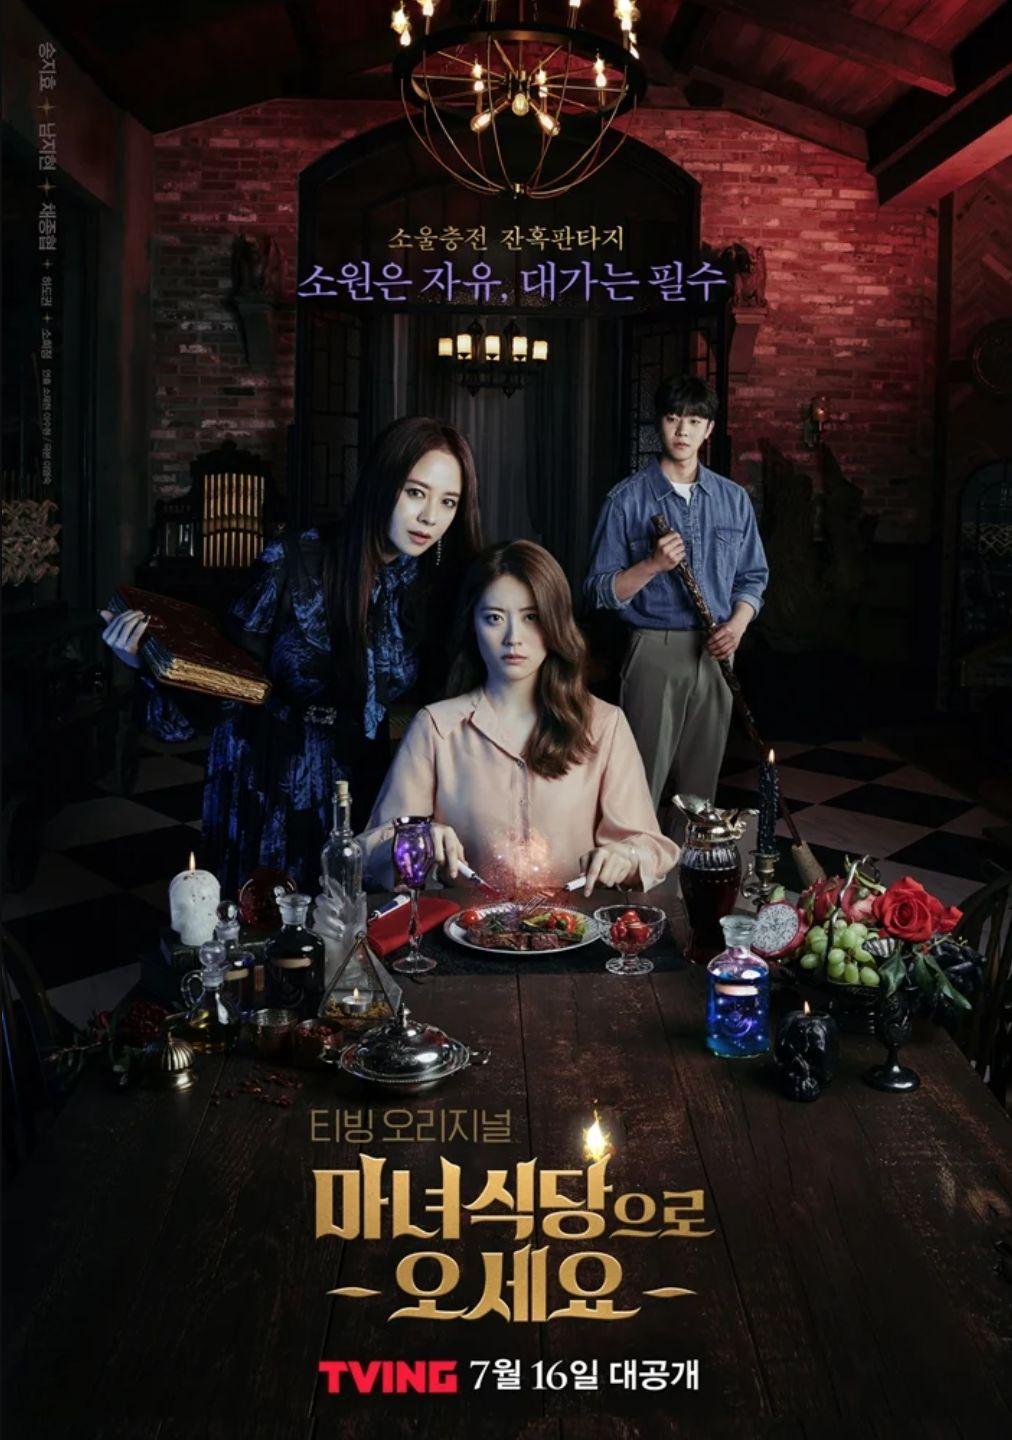 The Witch's Dinner Poster (Ảnh: Internet)